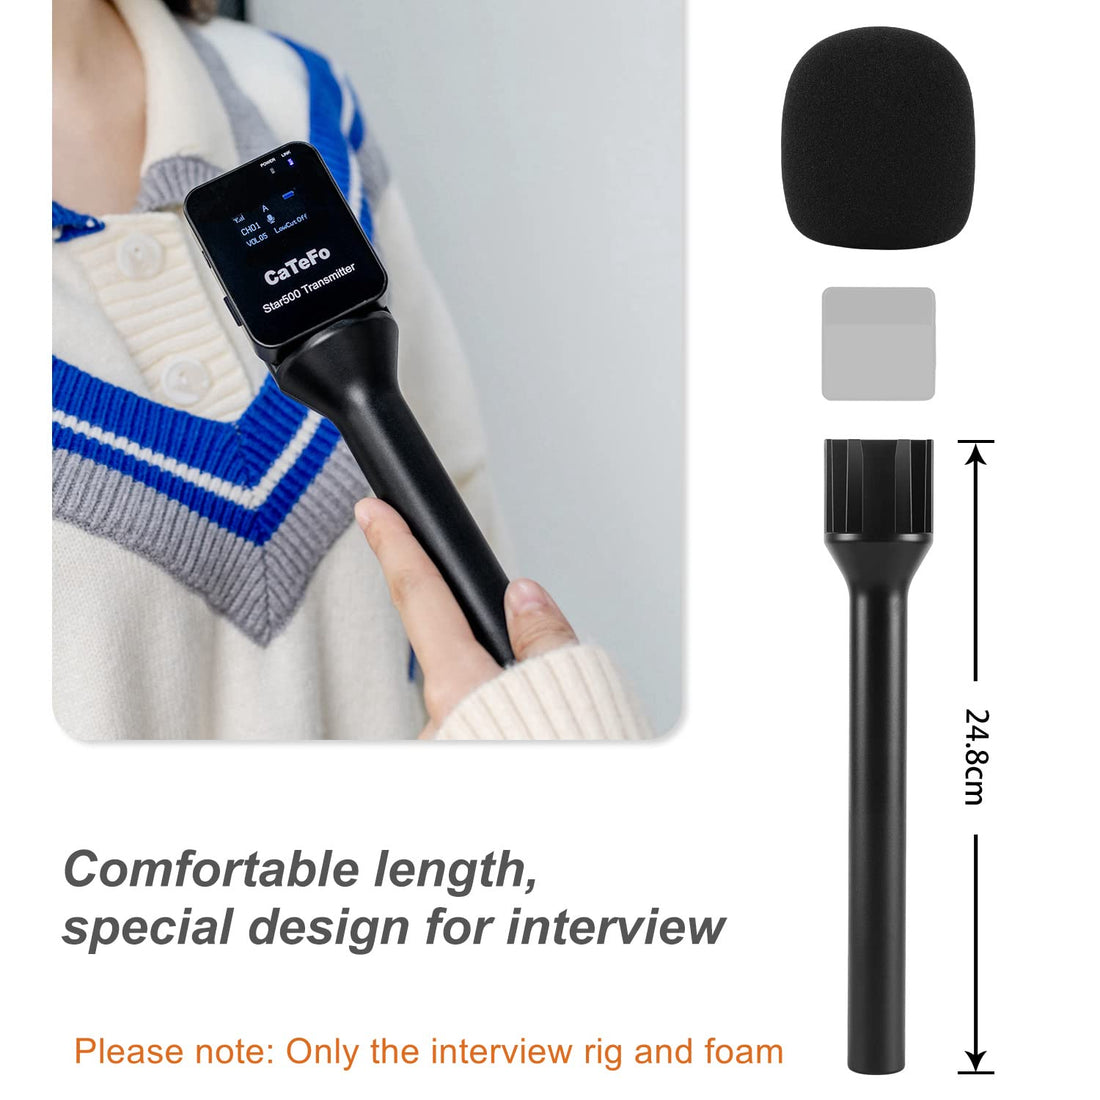 CaTeFo StarRig-S Microphone Handheld Adaptor Interview GO with Foam for RODE Wireless GO, GO II, DJI Mic, Lark150, G1/A2 and Other Wireless Transmitter with Cold Shoe